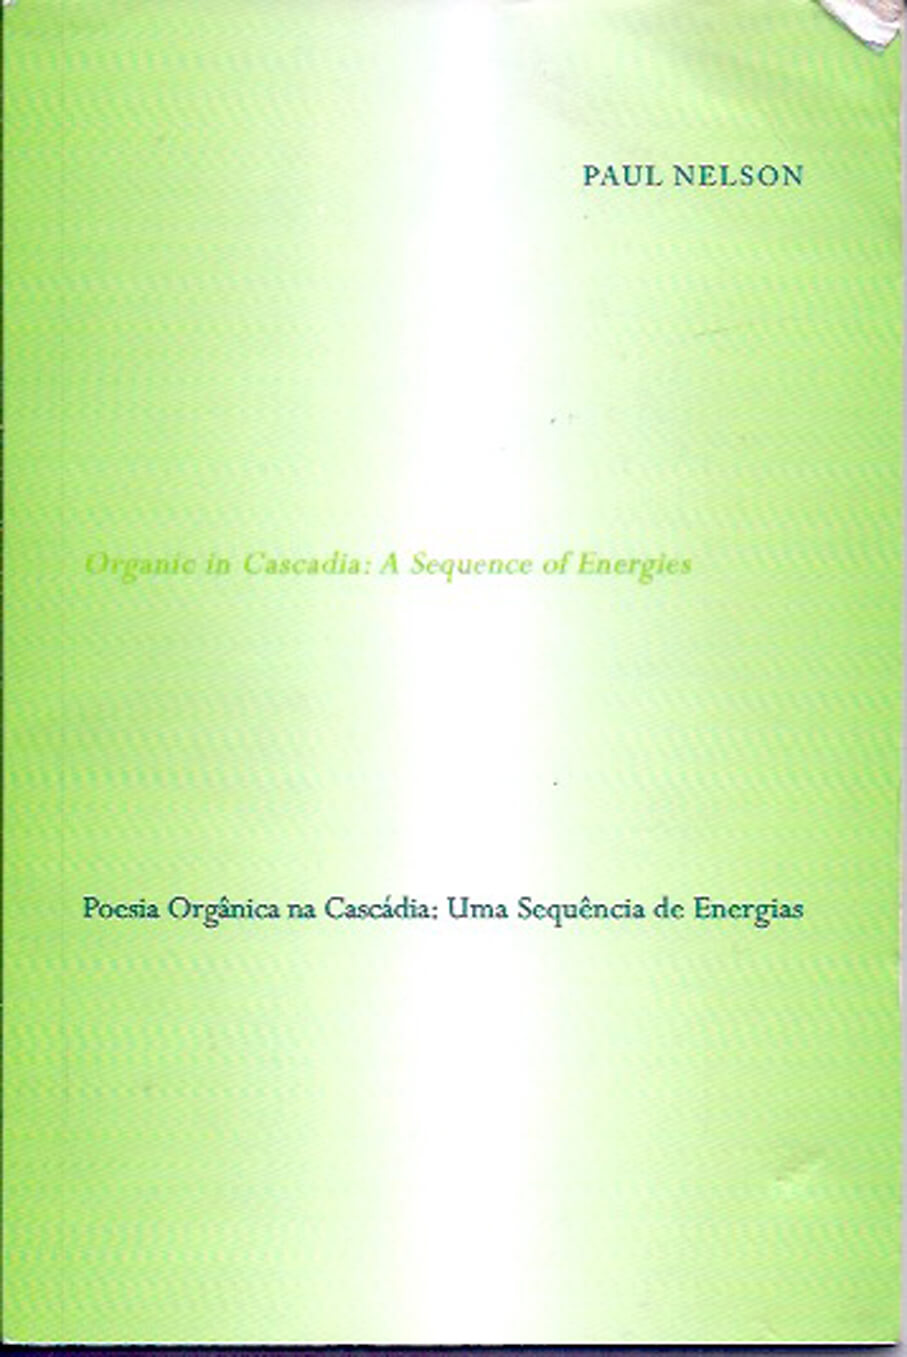 Organic in Cascadia: a Sequence of Energies